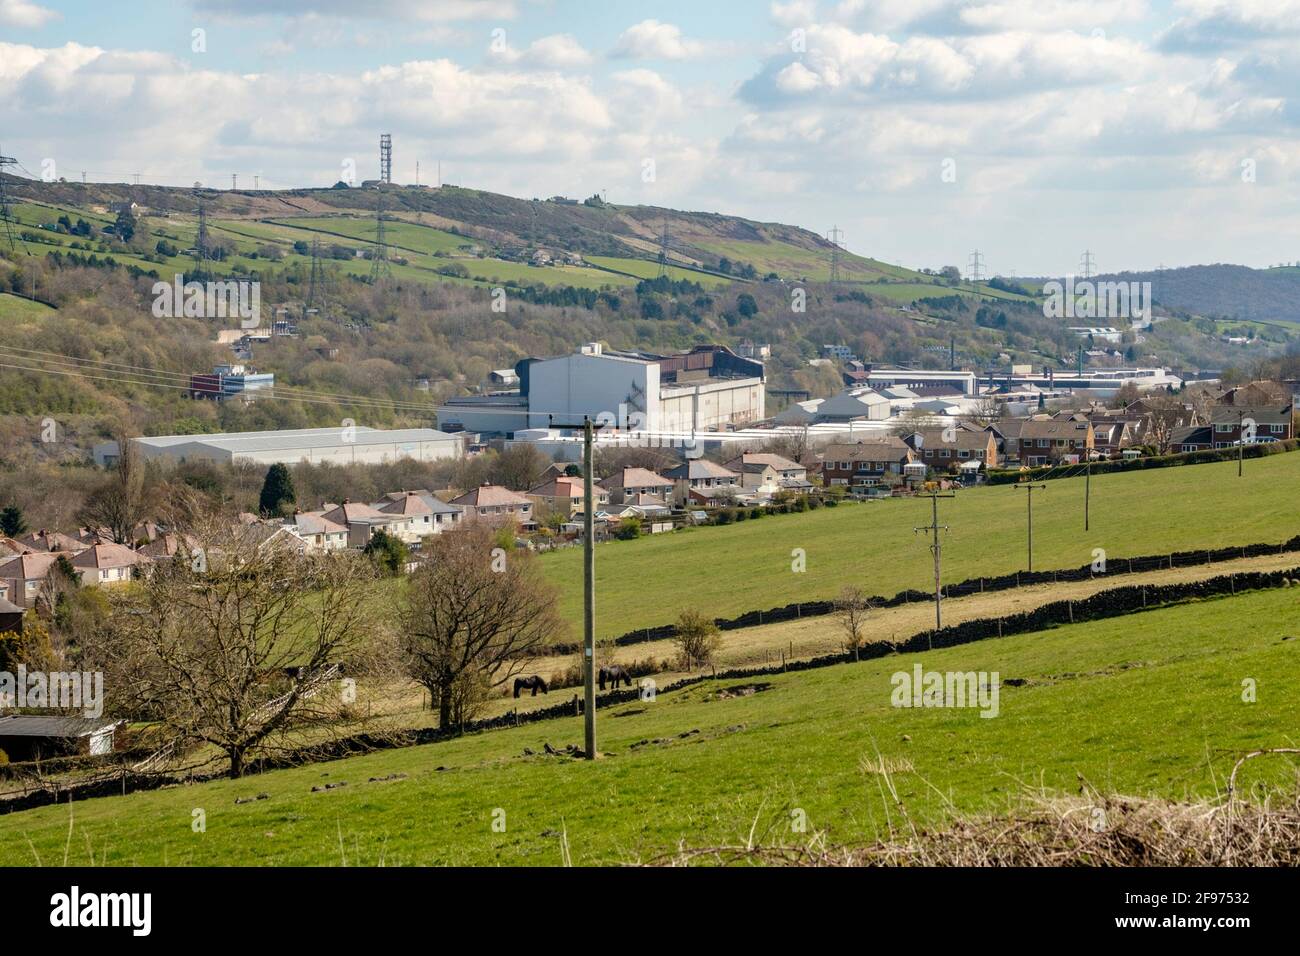 Sheffield, UK, April 16th, 2021. The Stocksbridge plant of Liberty Steel, run by British Indian Sanjeev Gupta. The future of the plant remains uncertain following the collapse of the groups main financier Greensill Capital, Liberty Steel works in Stocksbridge, near Sheffield, north of England on Friday, April 16th, 2021. Stock Photo